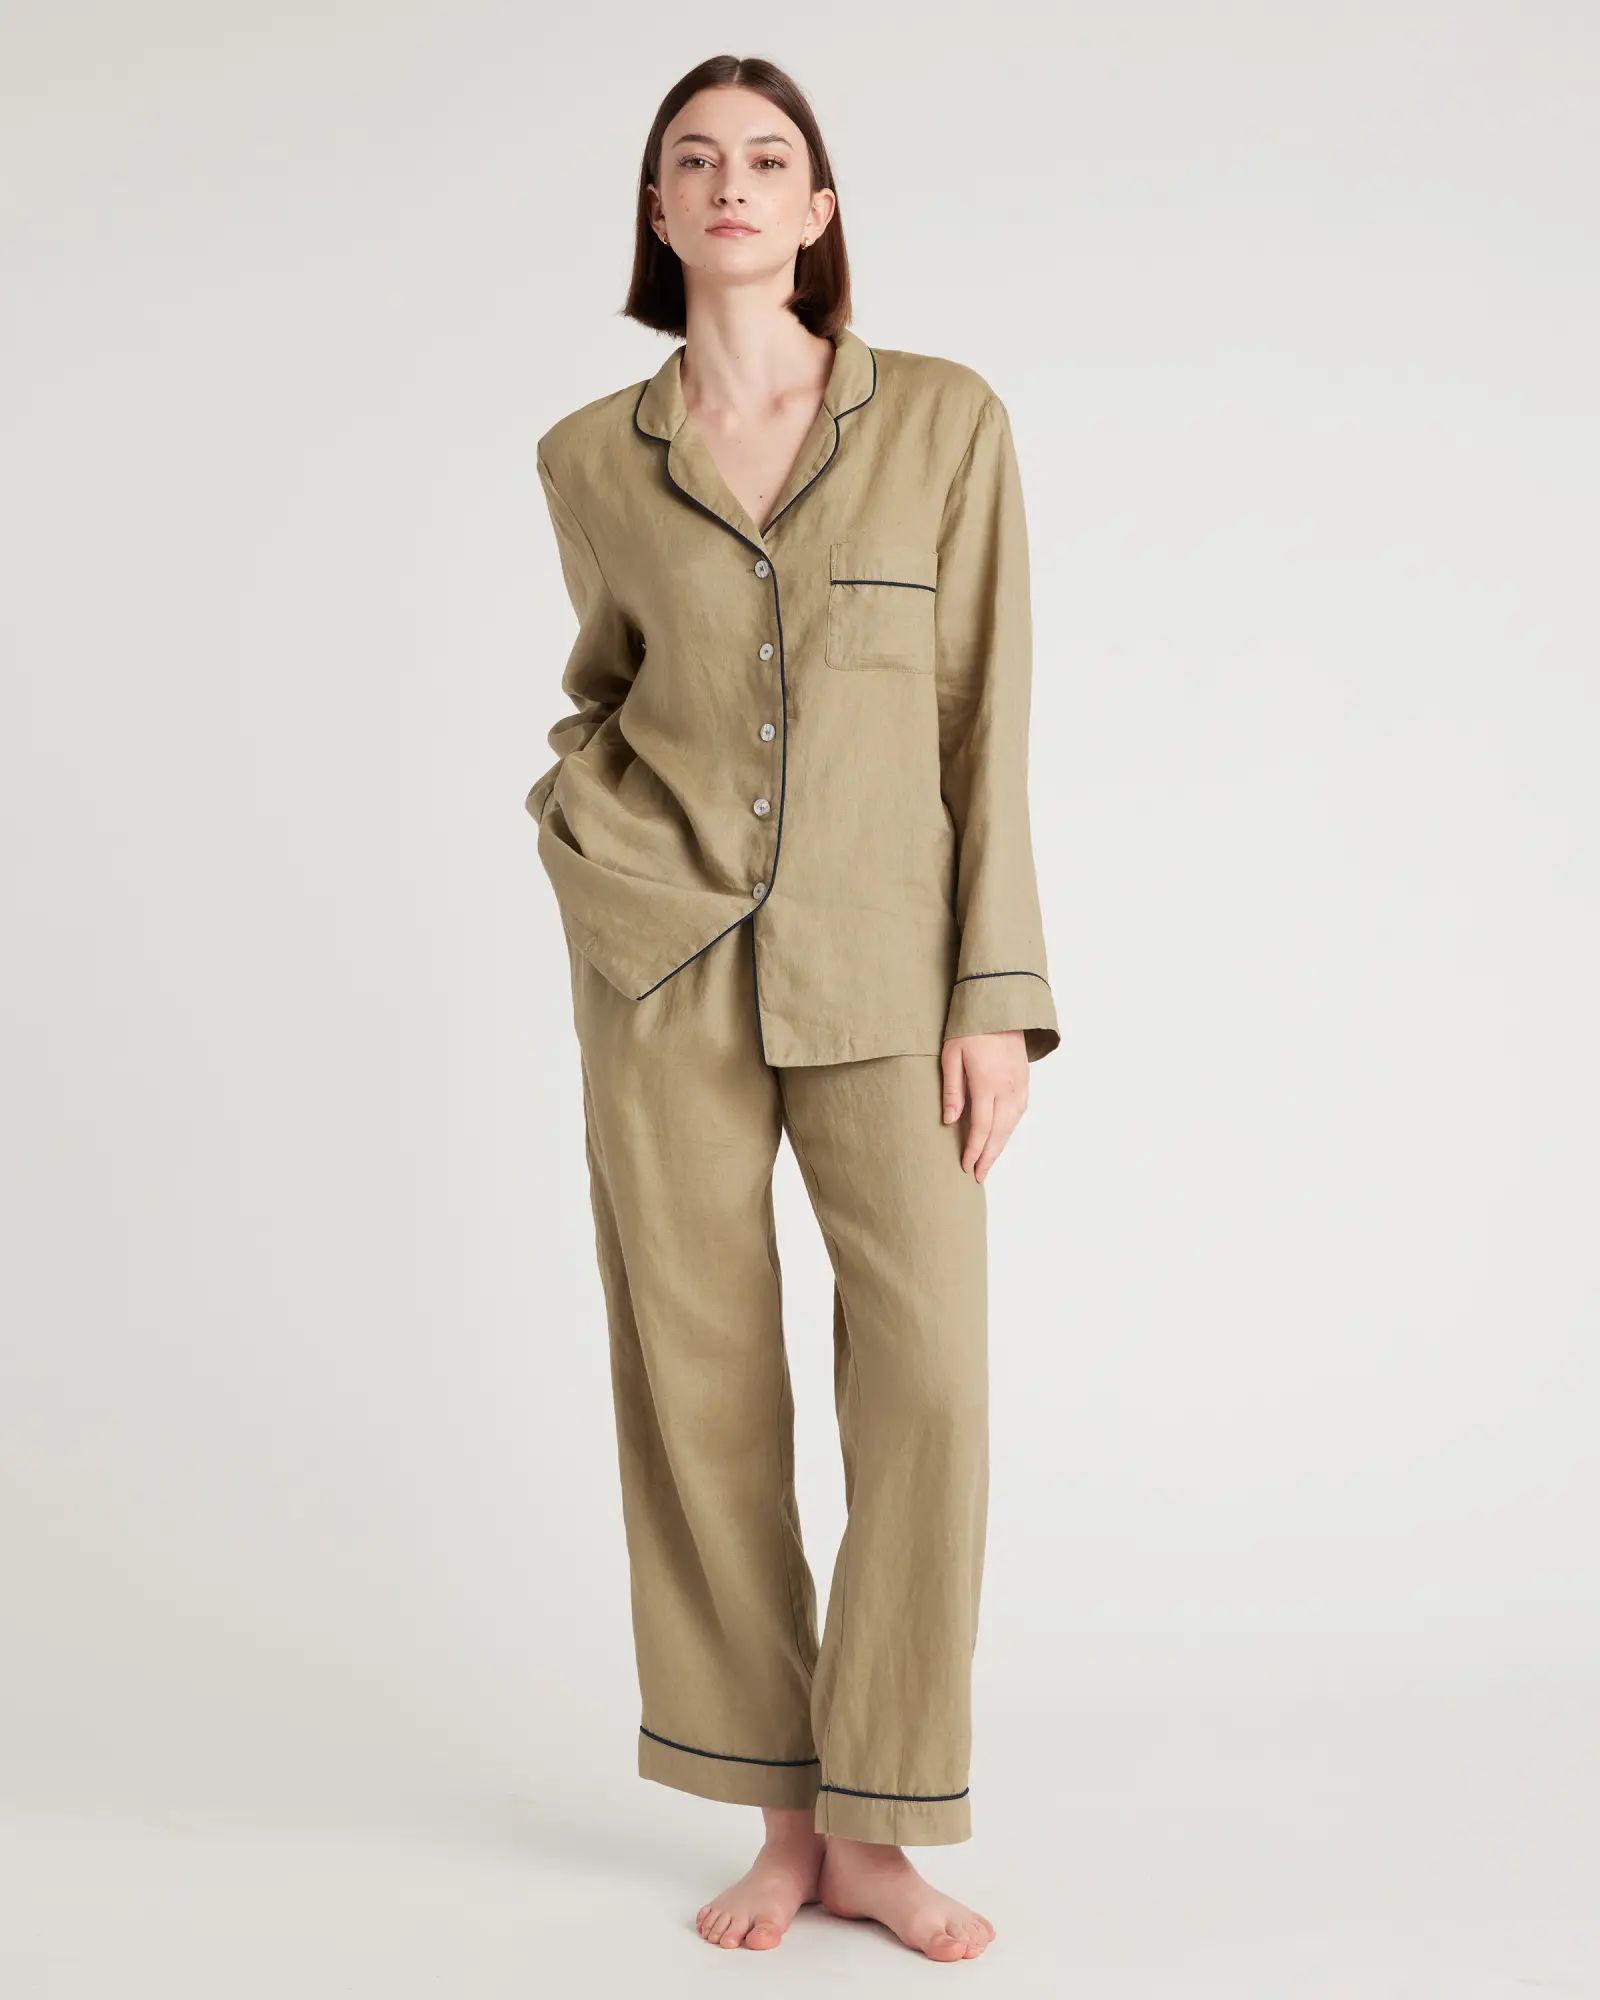 100% European Linen Long Sleeve Pajama Set with Piping | Quince